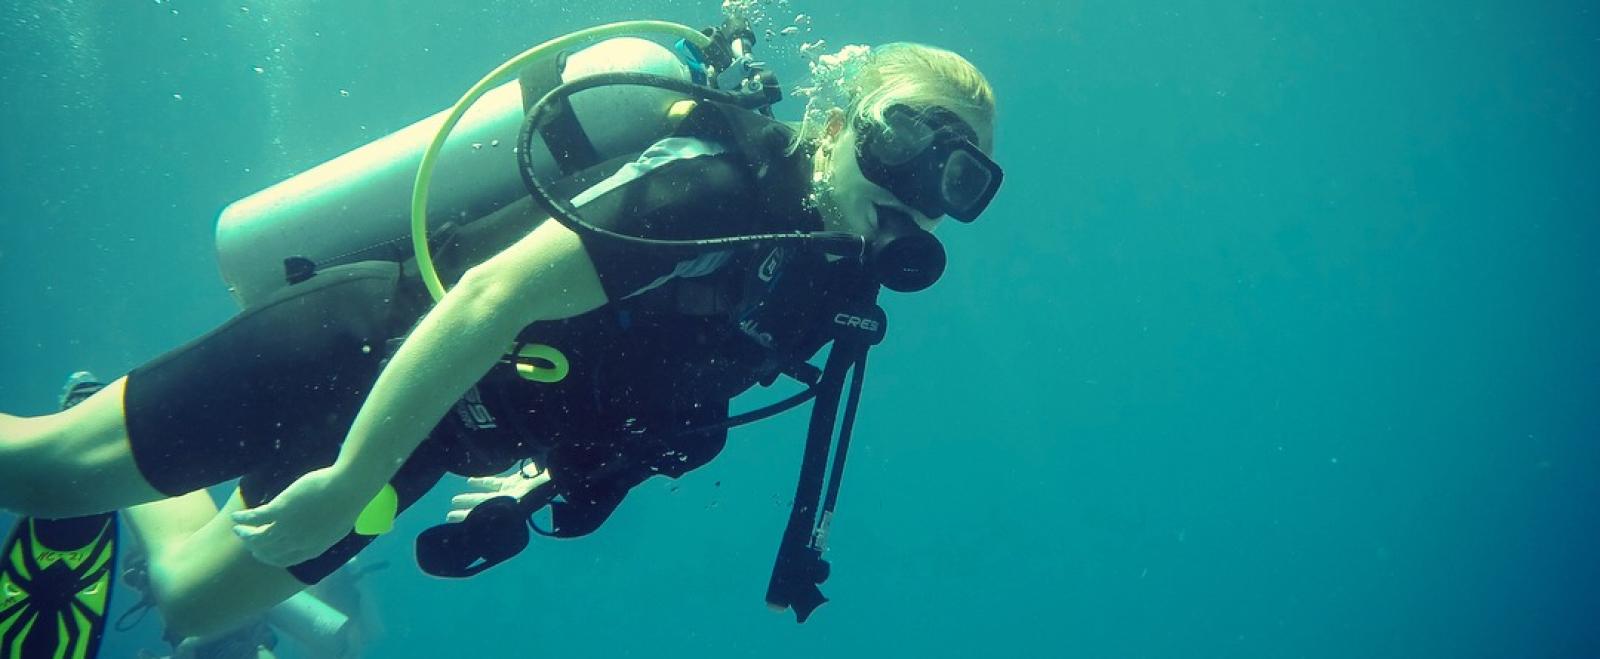 A projects Abroad volunteer that learnt to dive in Thailand after taking a divemaster course on a conservation project